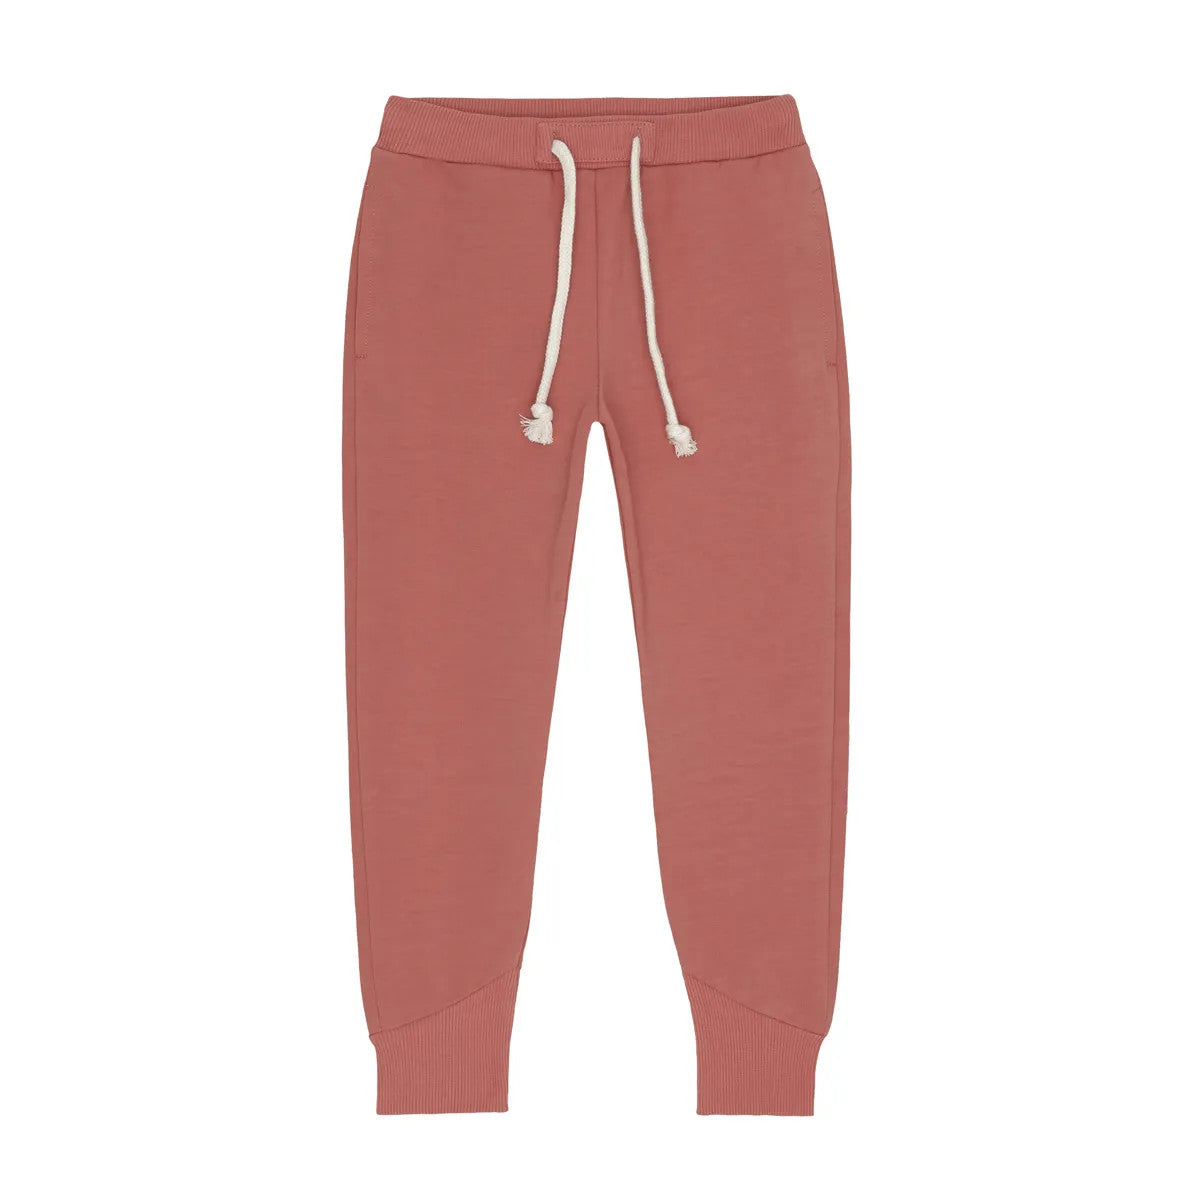 Little Hedonist skinny sweatpants in coral for boys and girls. Sustainable kids clothing made from organic cotton.